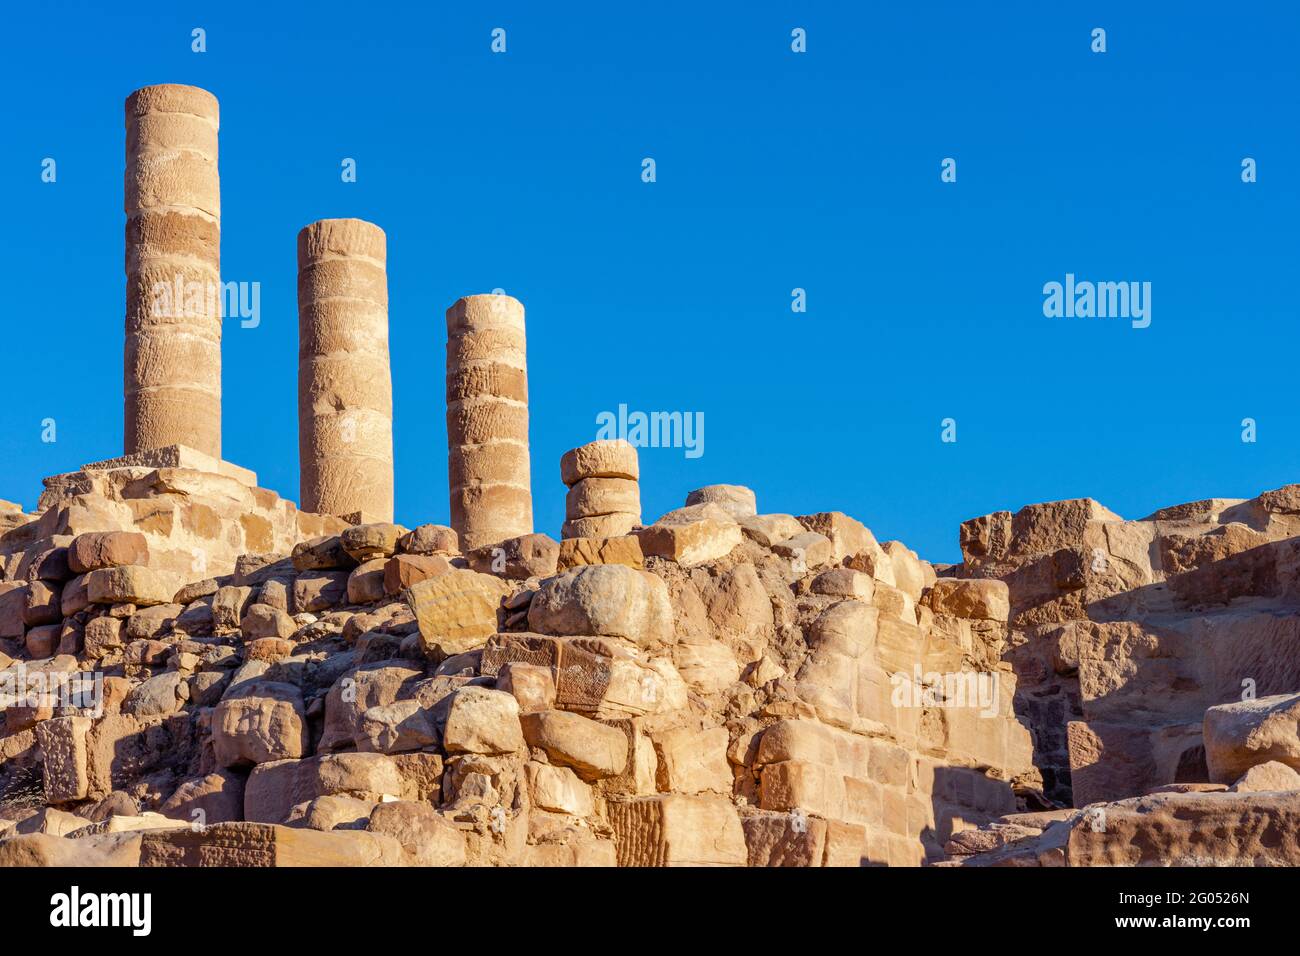 Colonnade with columns installed at great temple, on a clear summer day with blue sky, archaeological site of petra, jordan Stock Photo